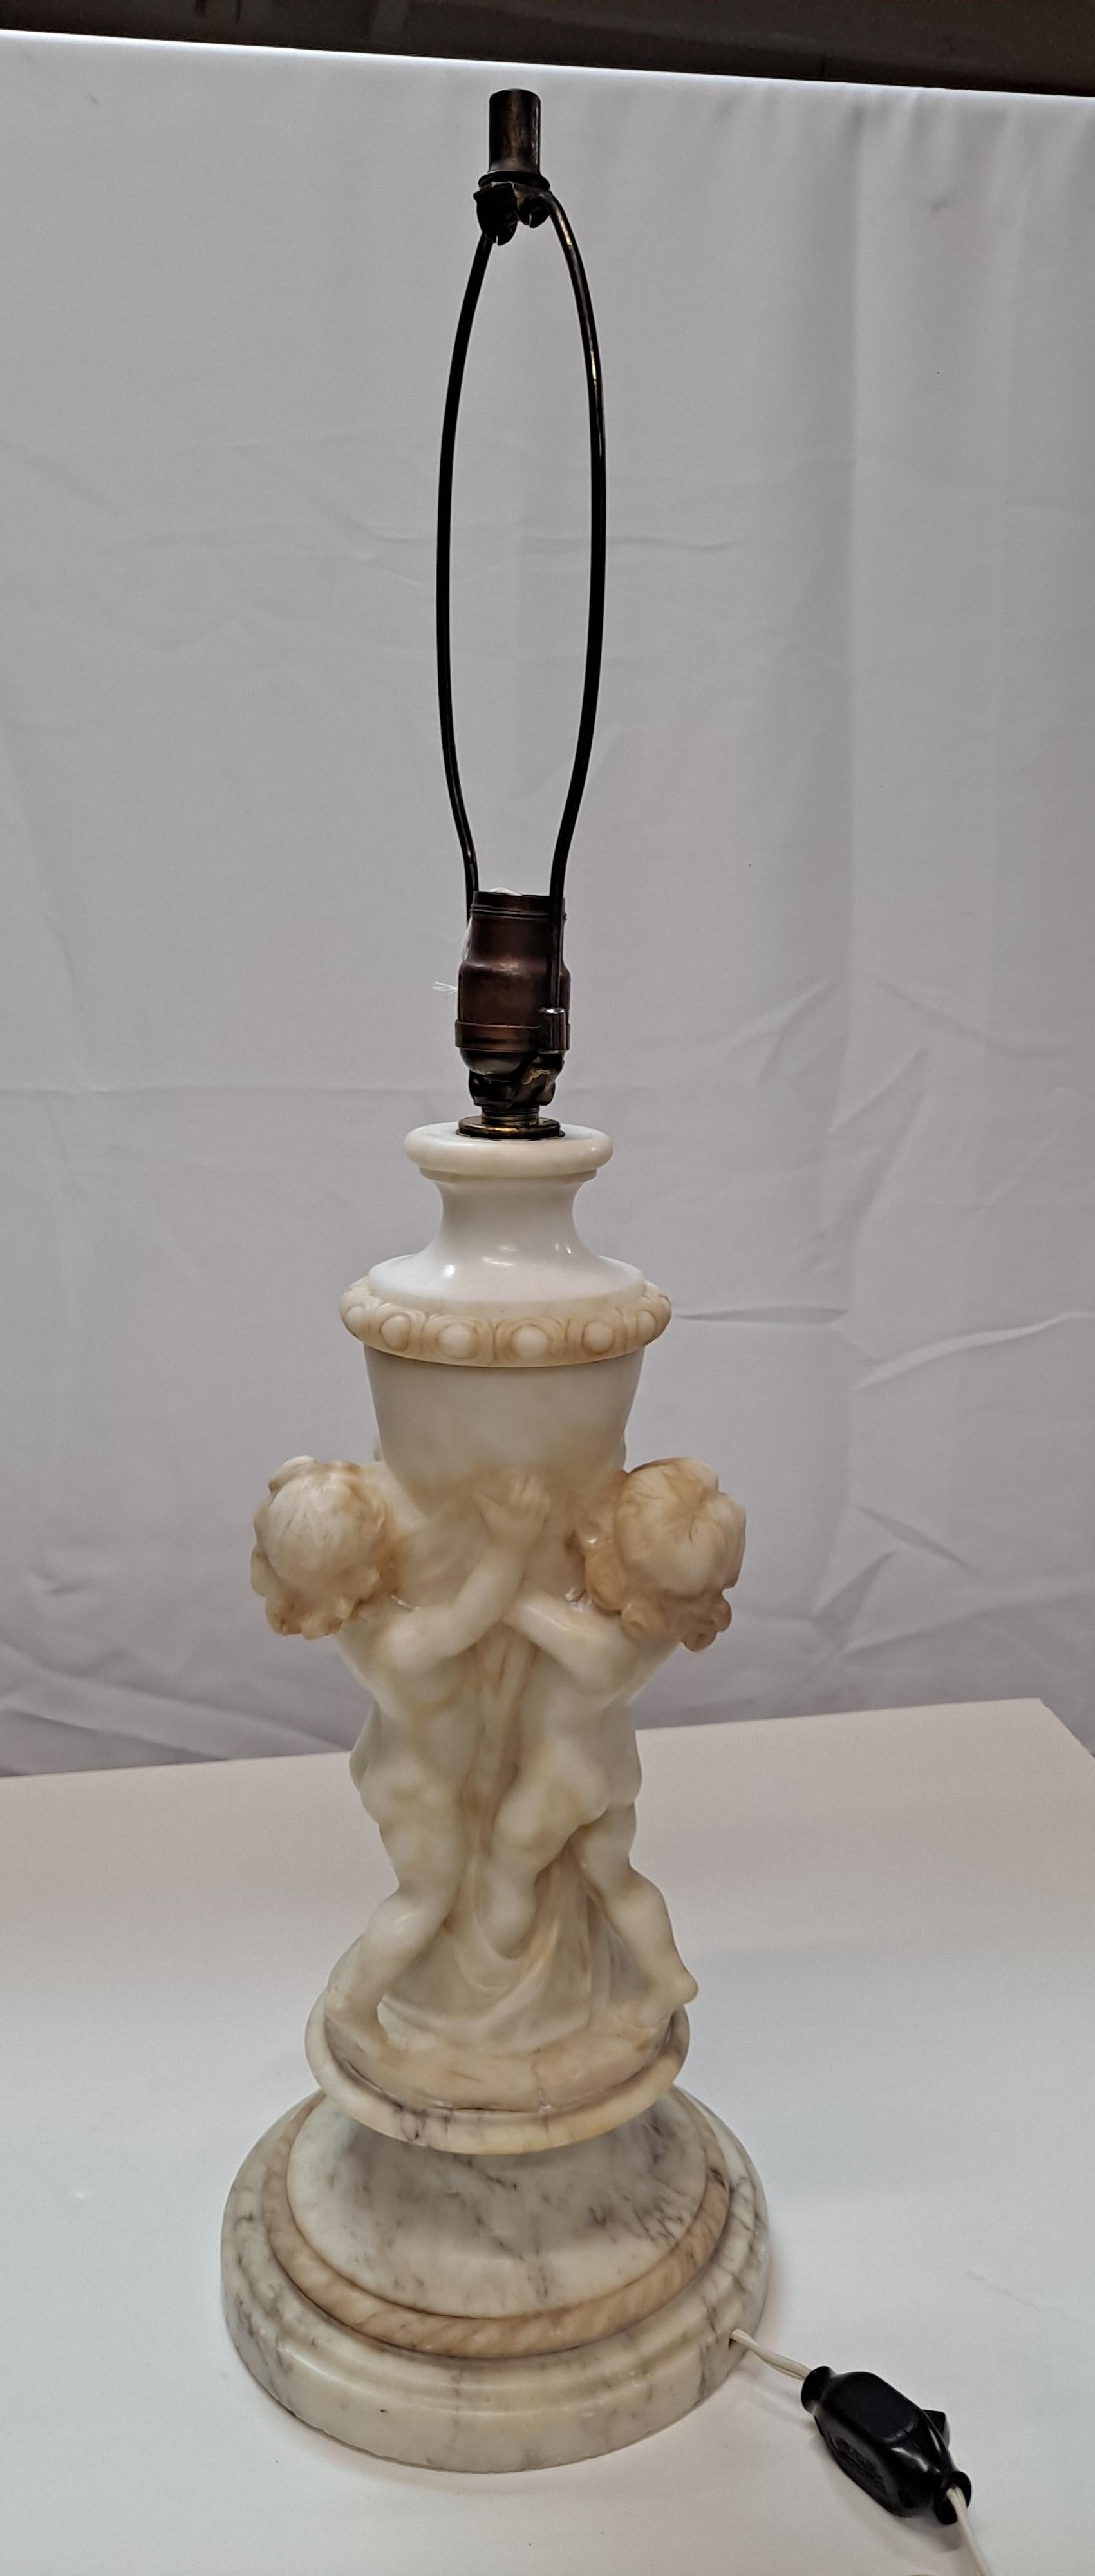 19th century Italian Carved Alabaster Sculpture Lamp with Marble Base  In Good Condition For Sale In San Francisco, CA